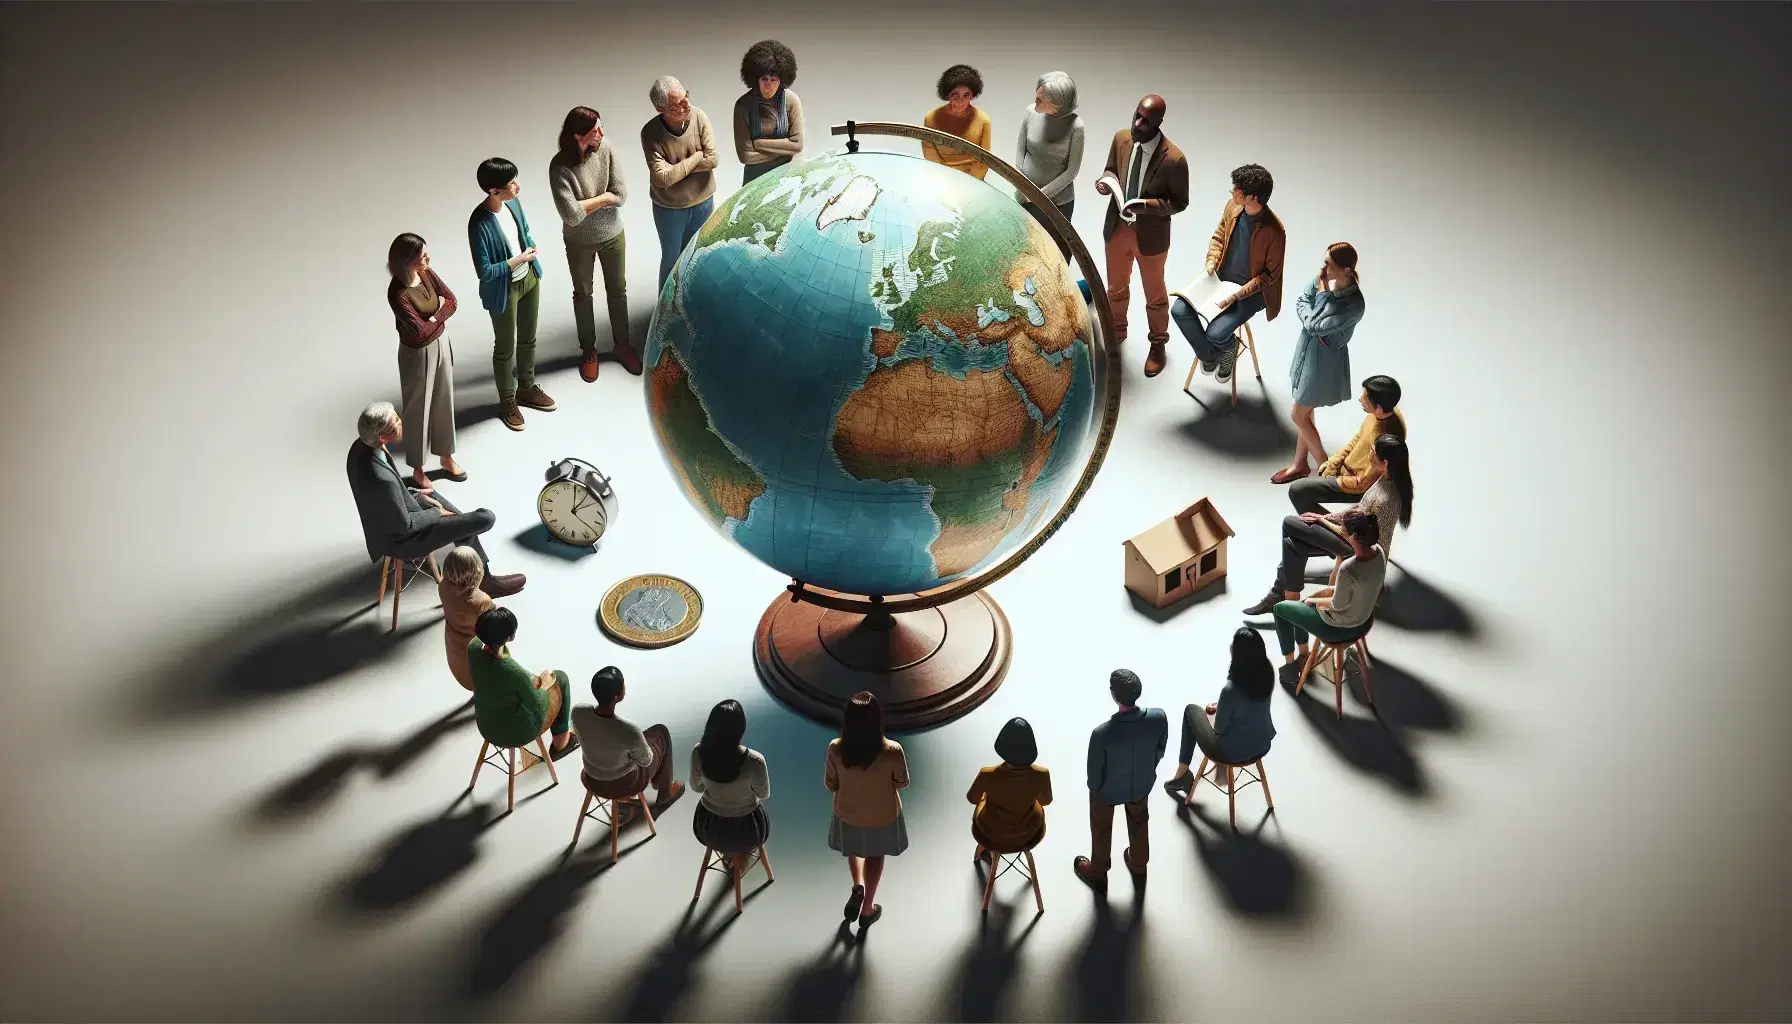 Multi-ethnic group in a circle discussing around a traditional world globe on a wooden pedestal, surrounded by social symbols on a neutral background.